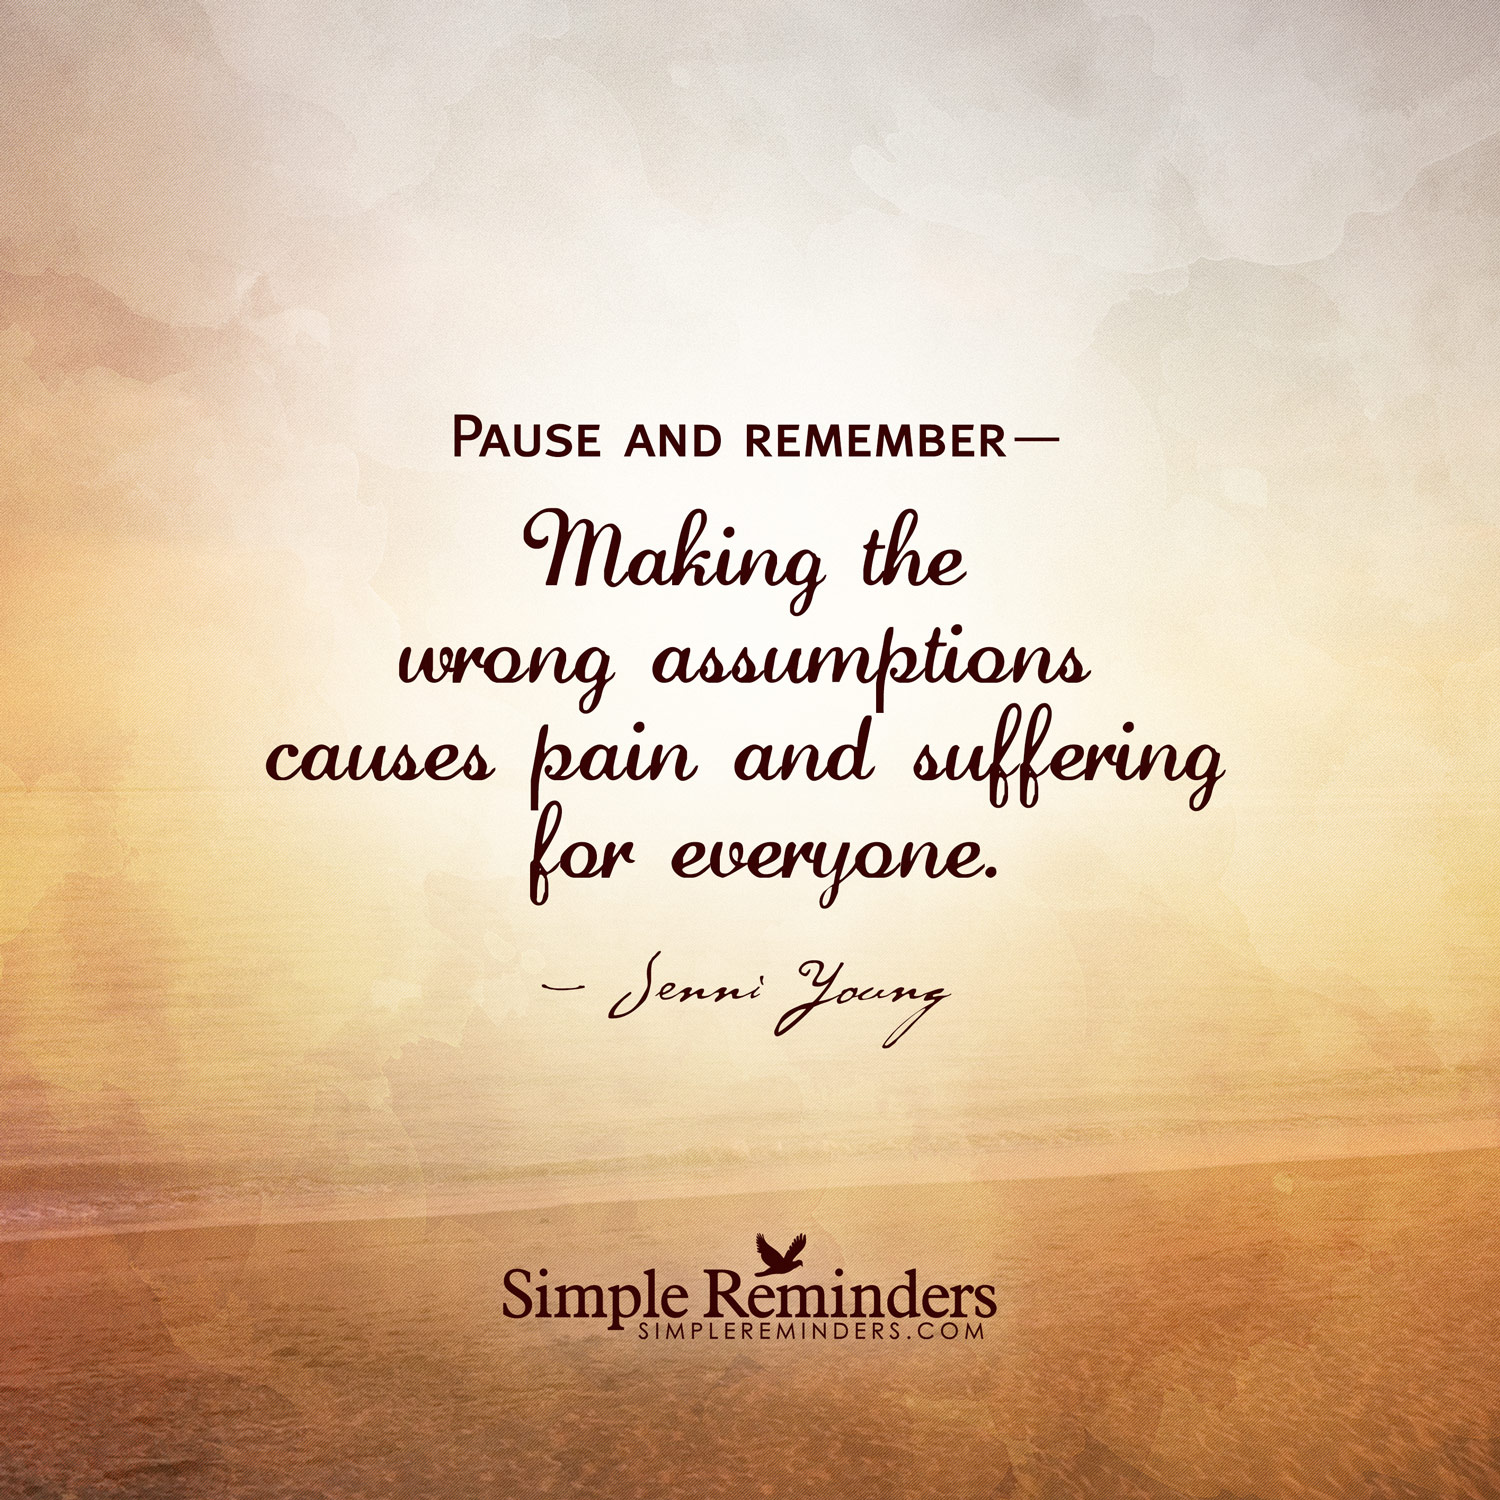 Pause and remember Making the wrong assumptions causes pain and suffering for everyone. Jenni Young